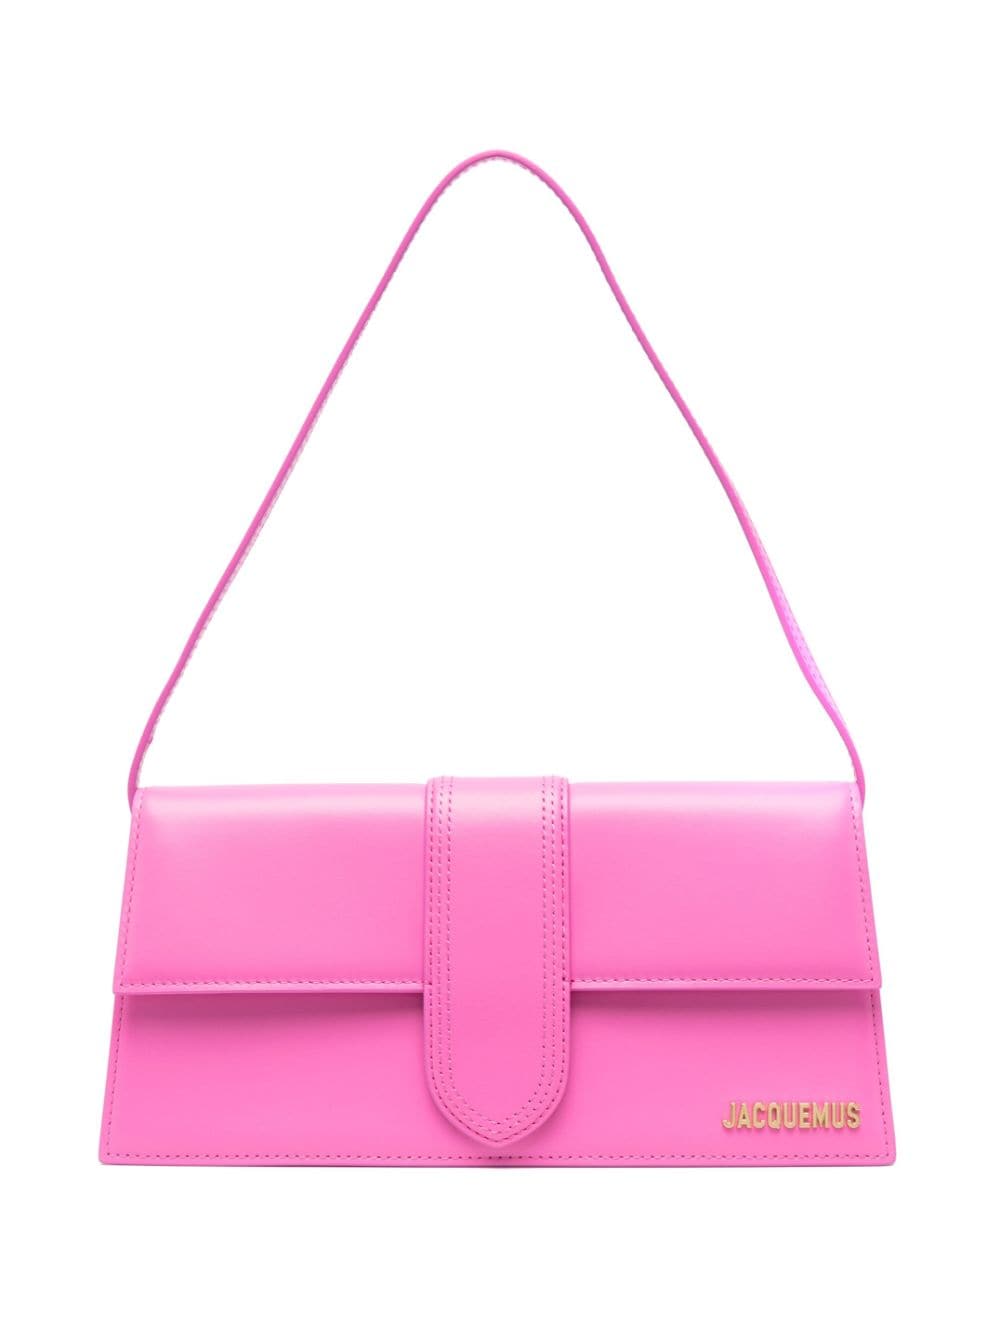 JACQUEMUS Flamingo Pink Leather Mini Crossbody Bag with Gold-Tone Accents and Magnetic Closure